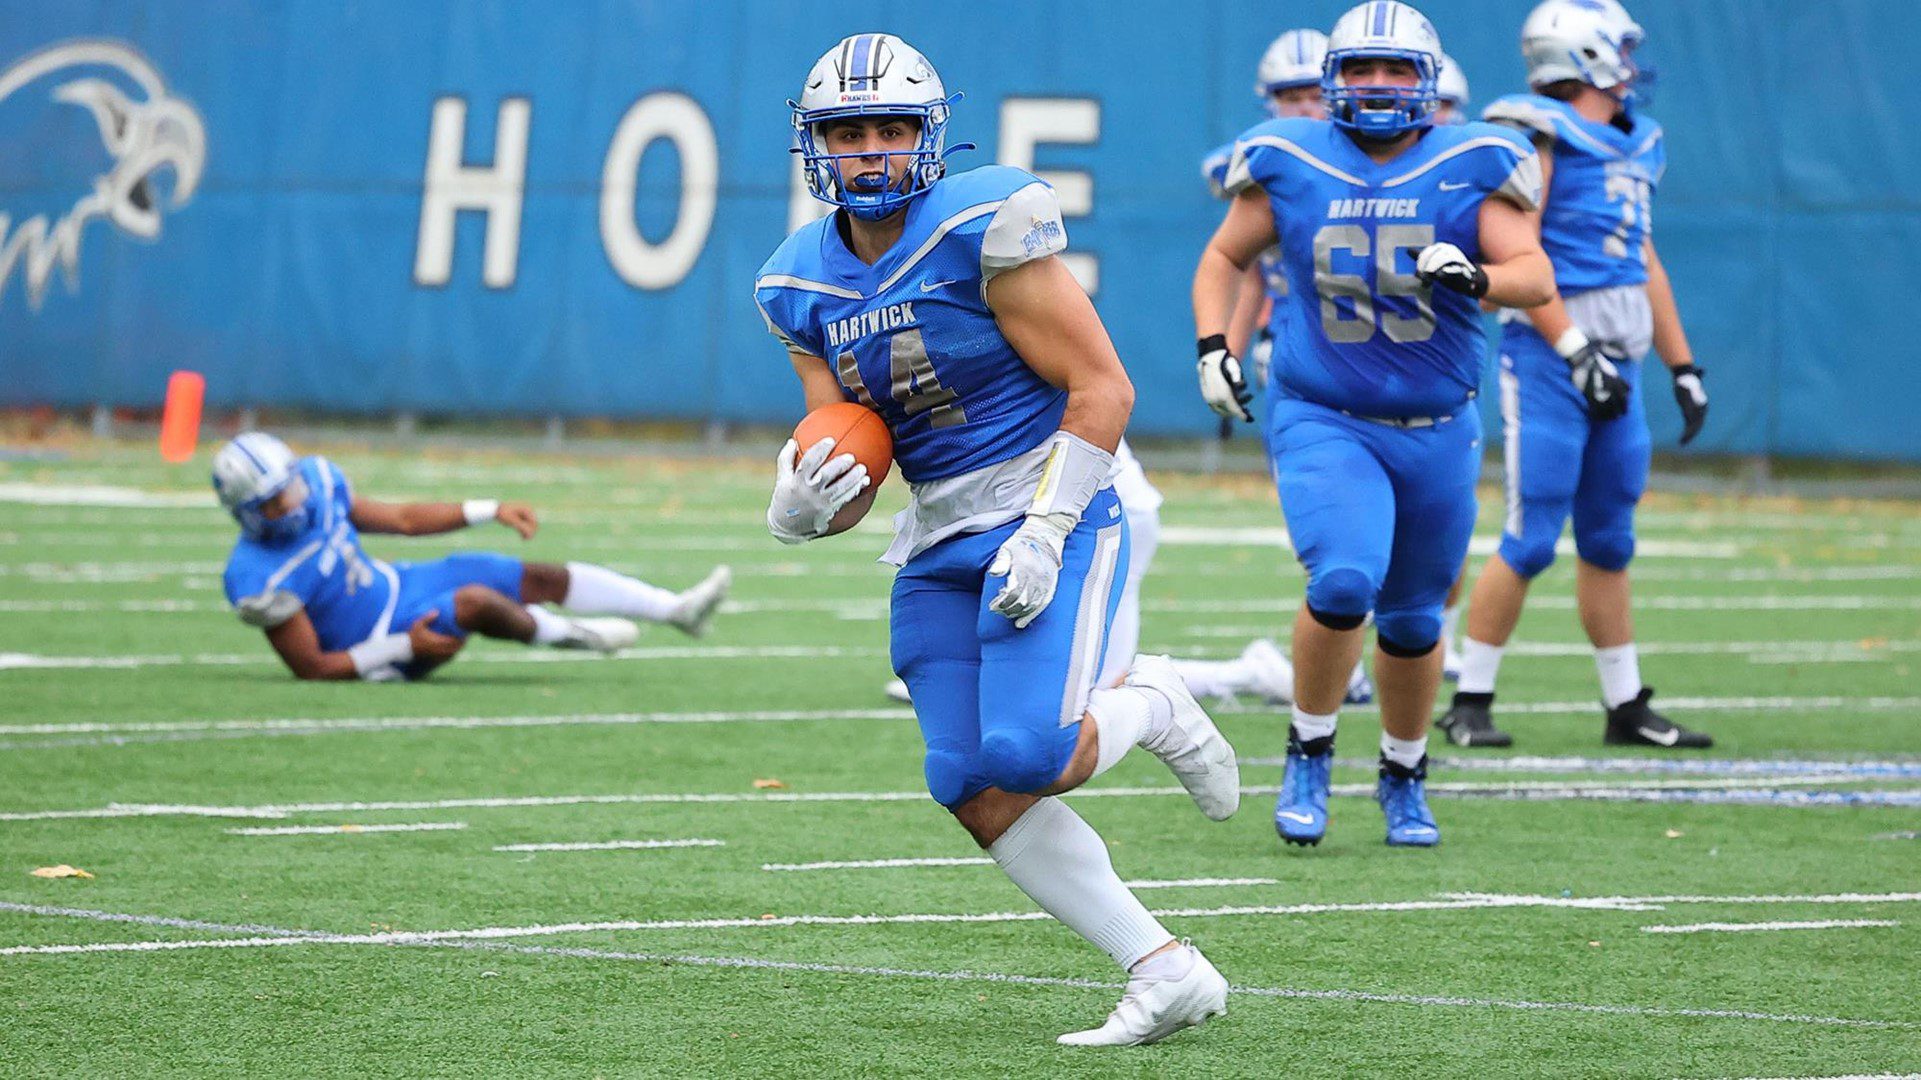 Davien Kuinlan the standout running back from Hartwick College recently sat down with NFL Draft Diamonds owner Damond Talbot